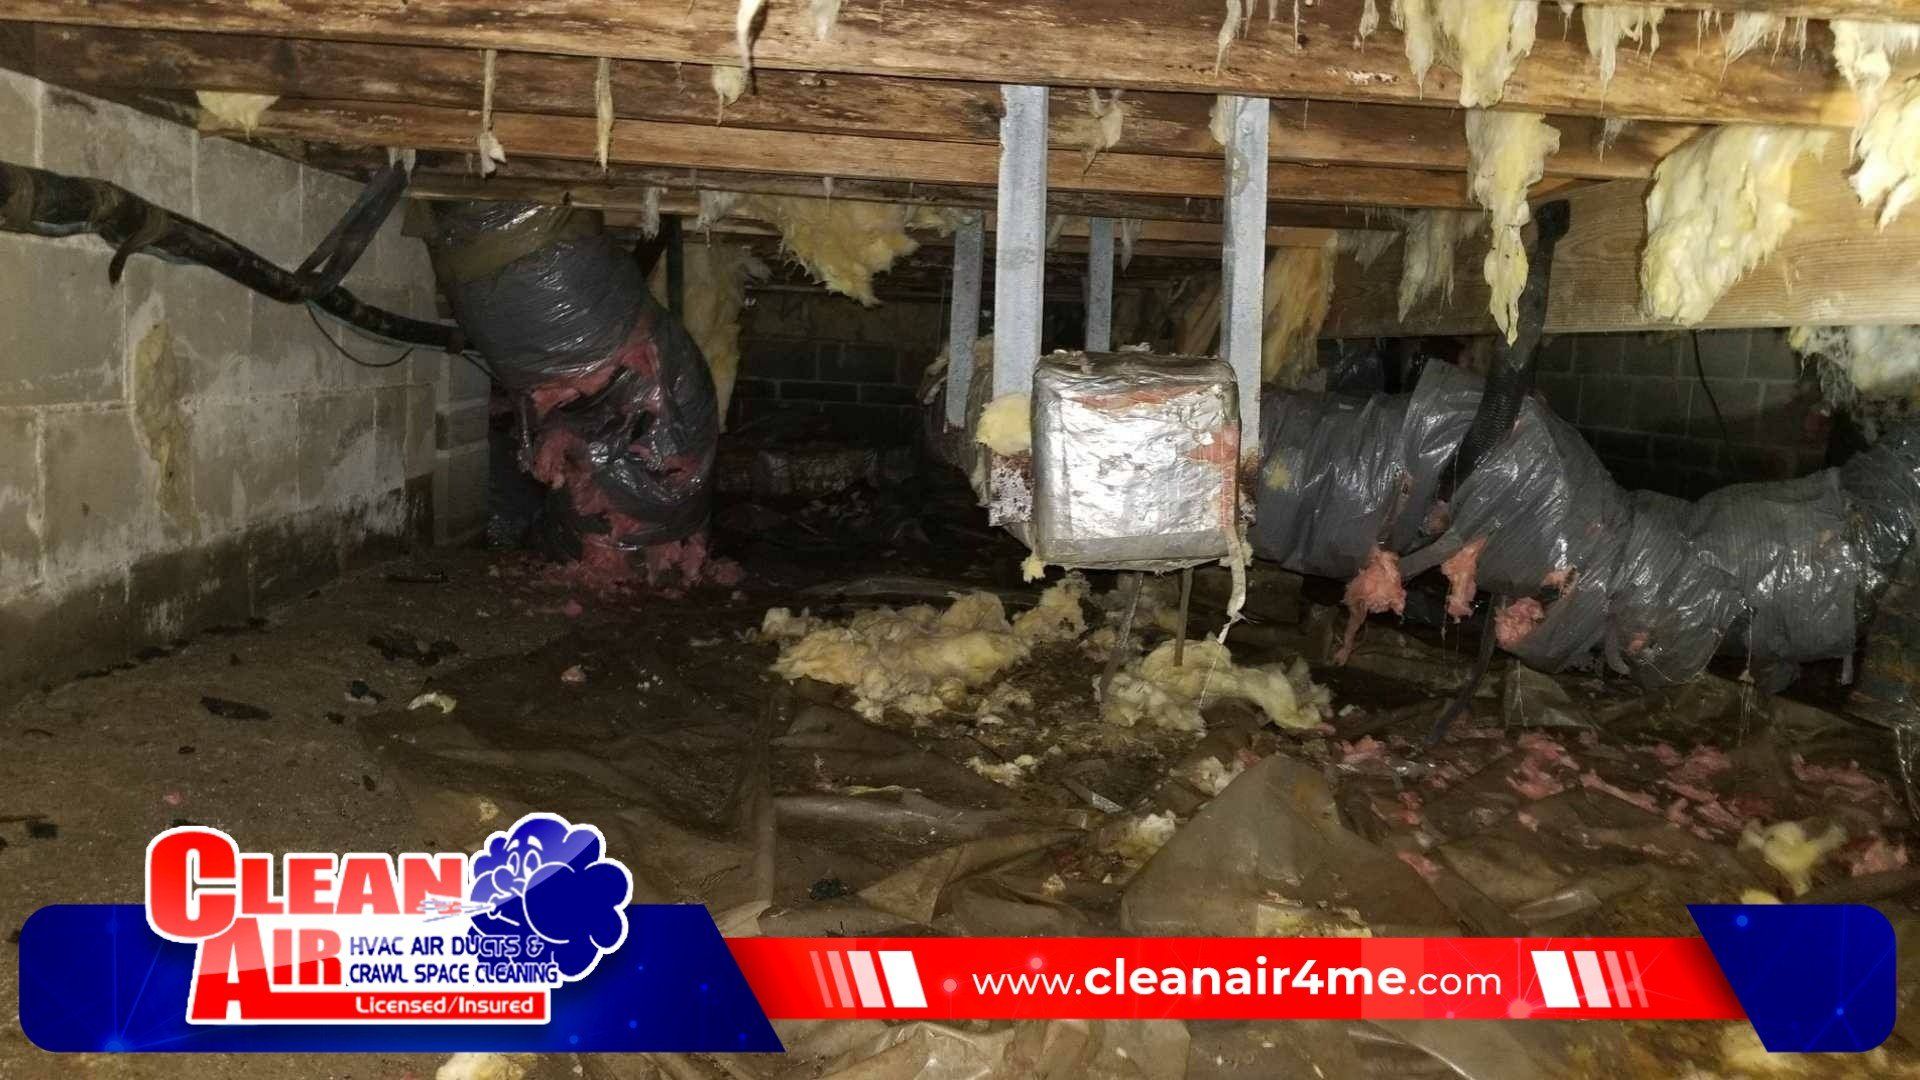 CRAWL SPACE CLEANING IN GREENSBORO, NC